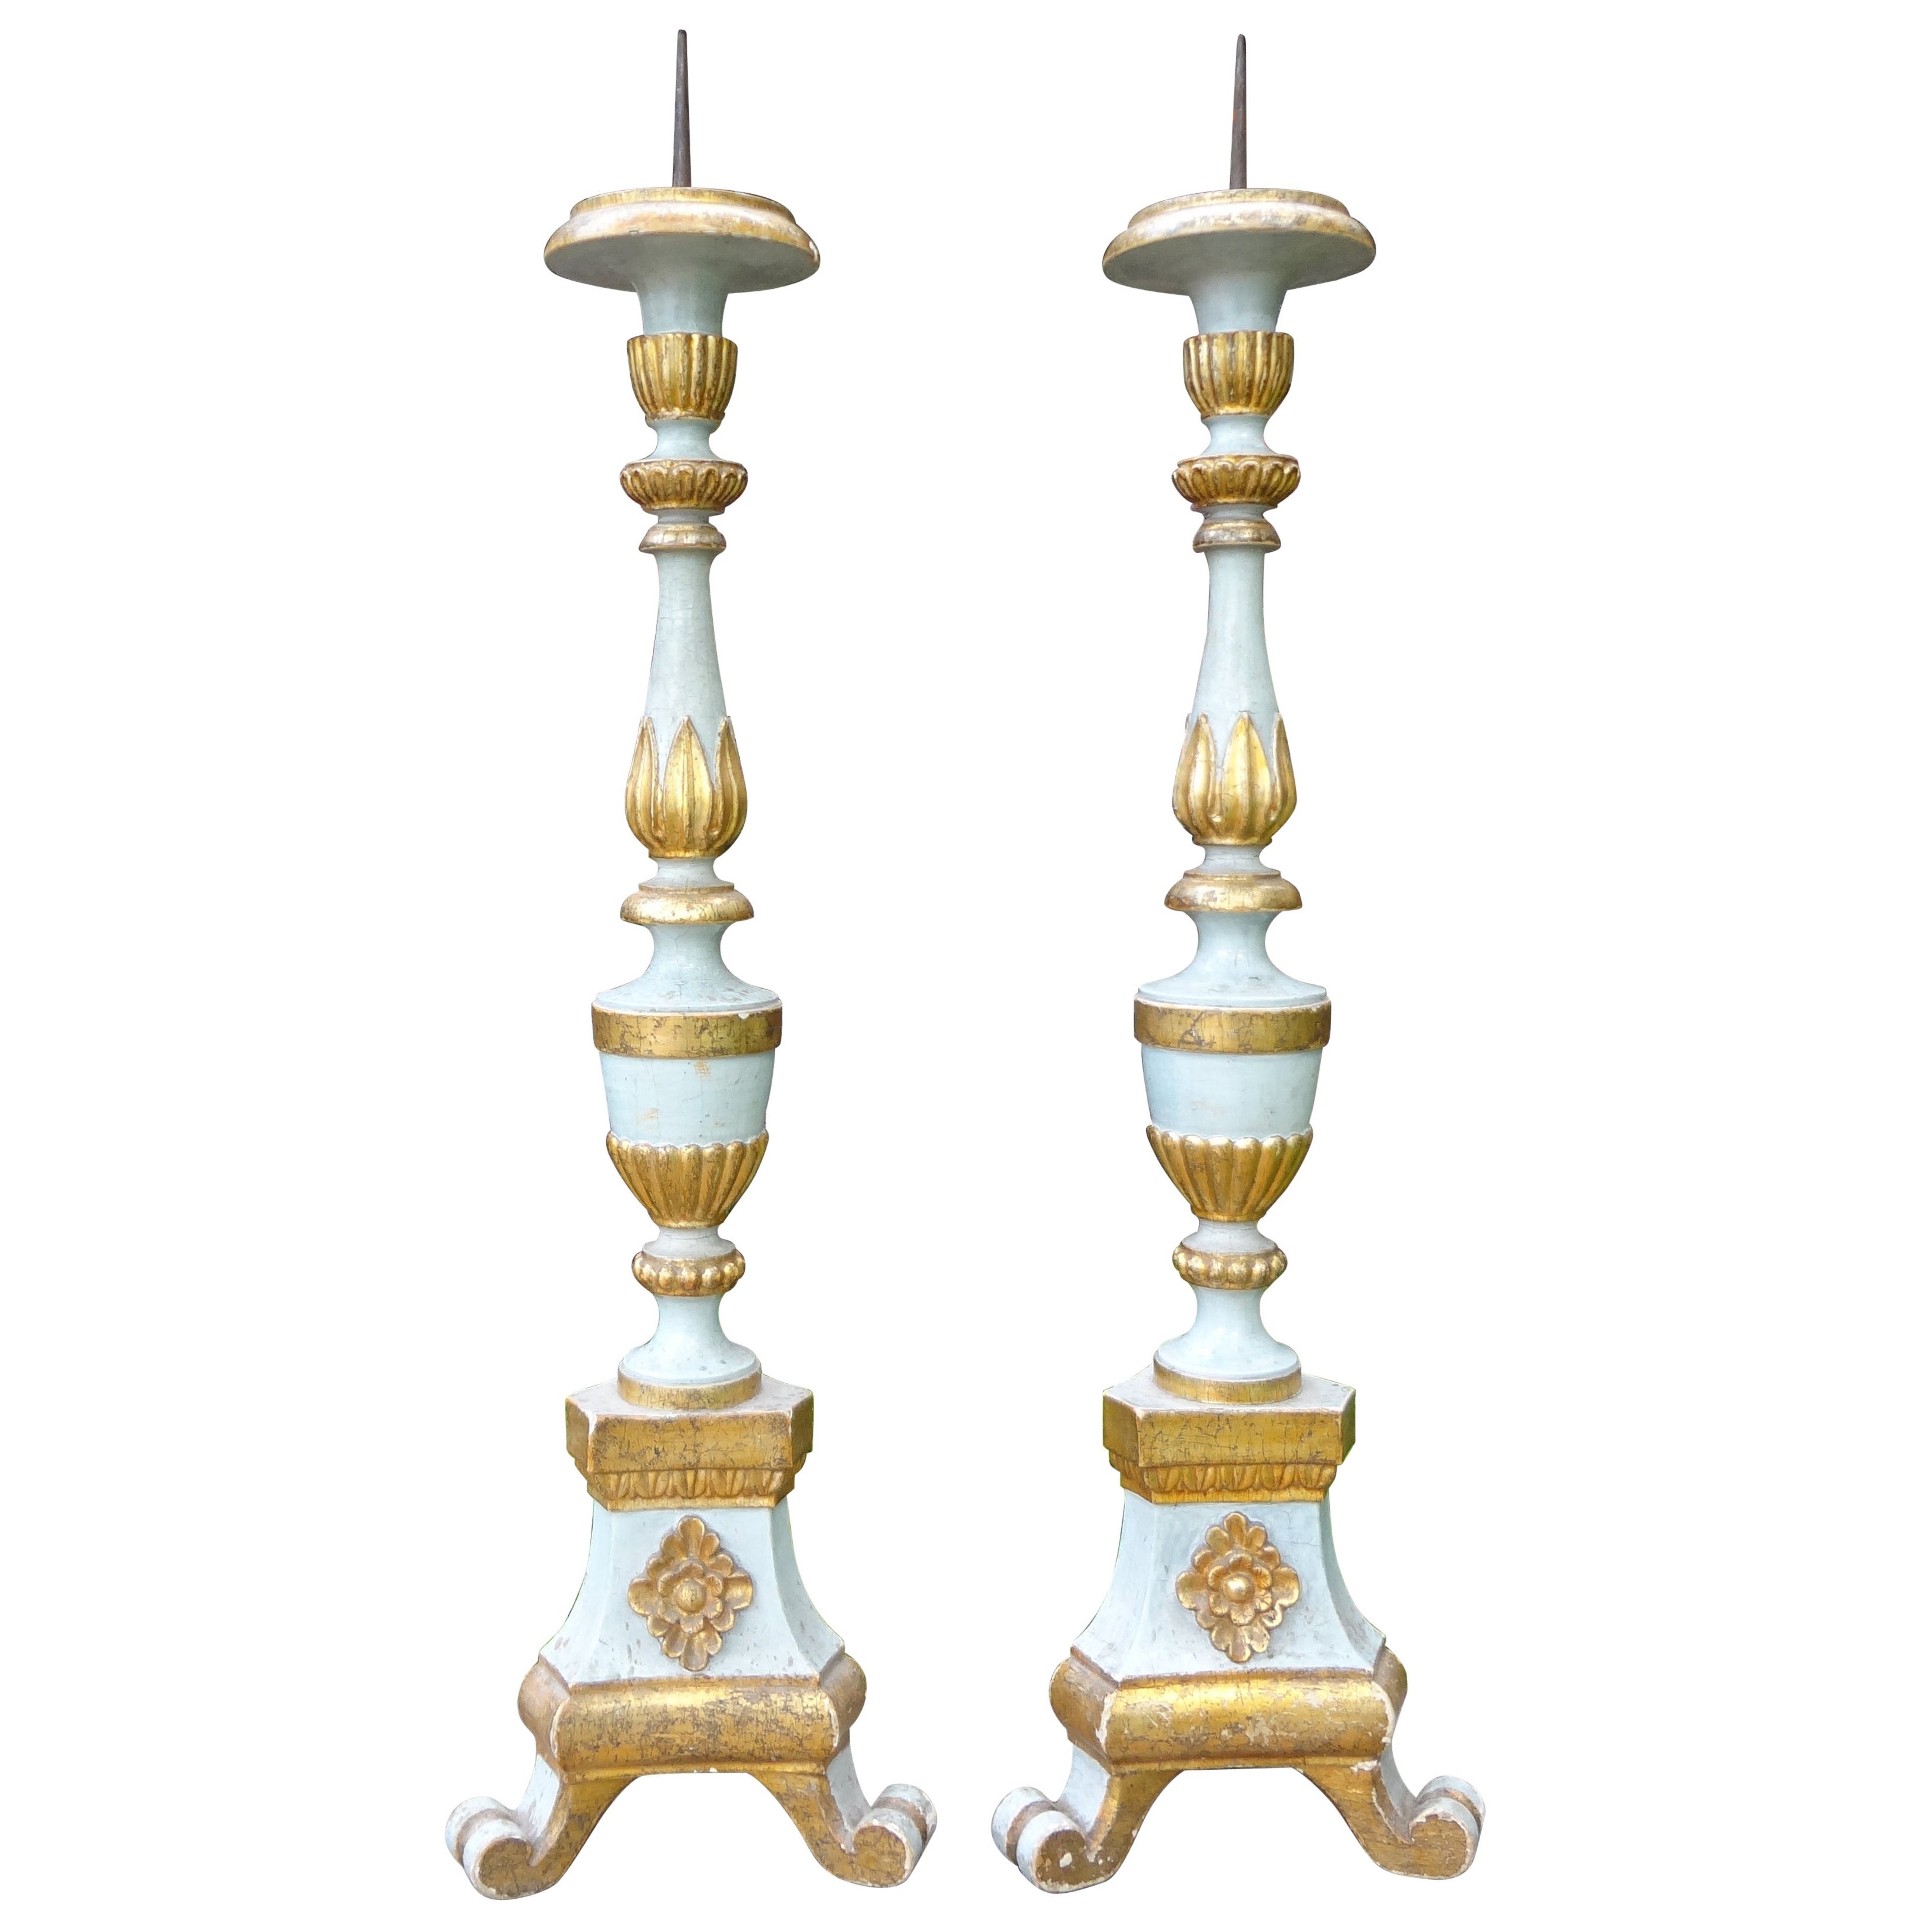 Pair of 19th Century Italian Painted And Gilt Altar Sticks or Prickets For Sale